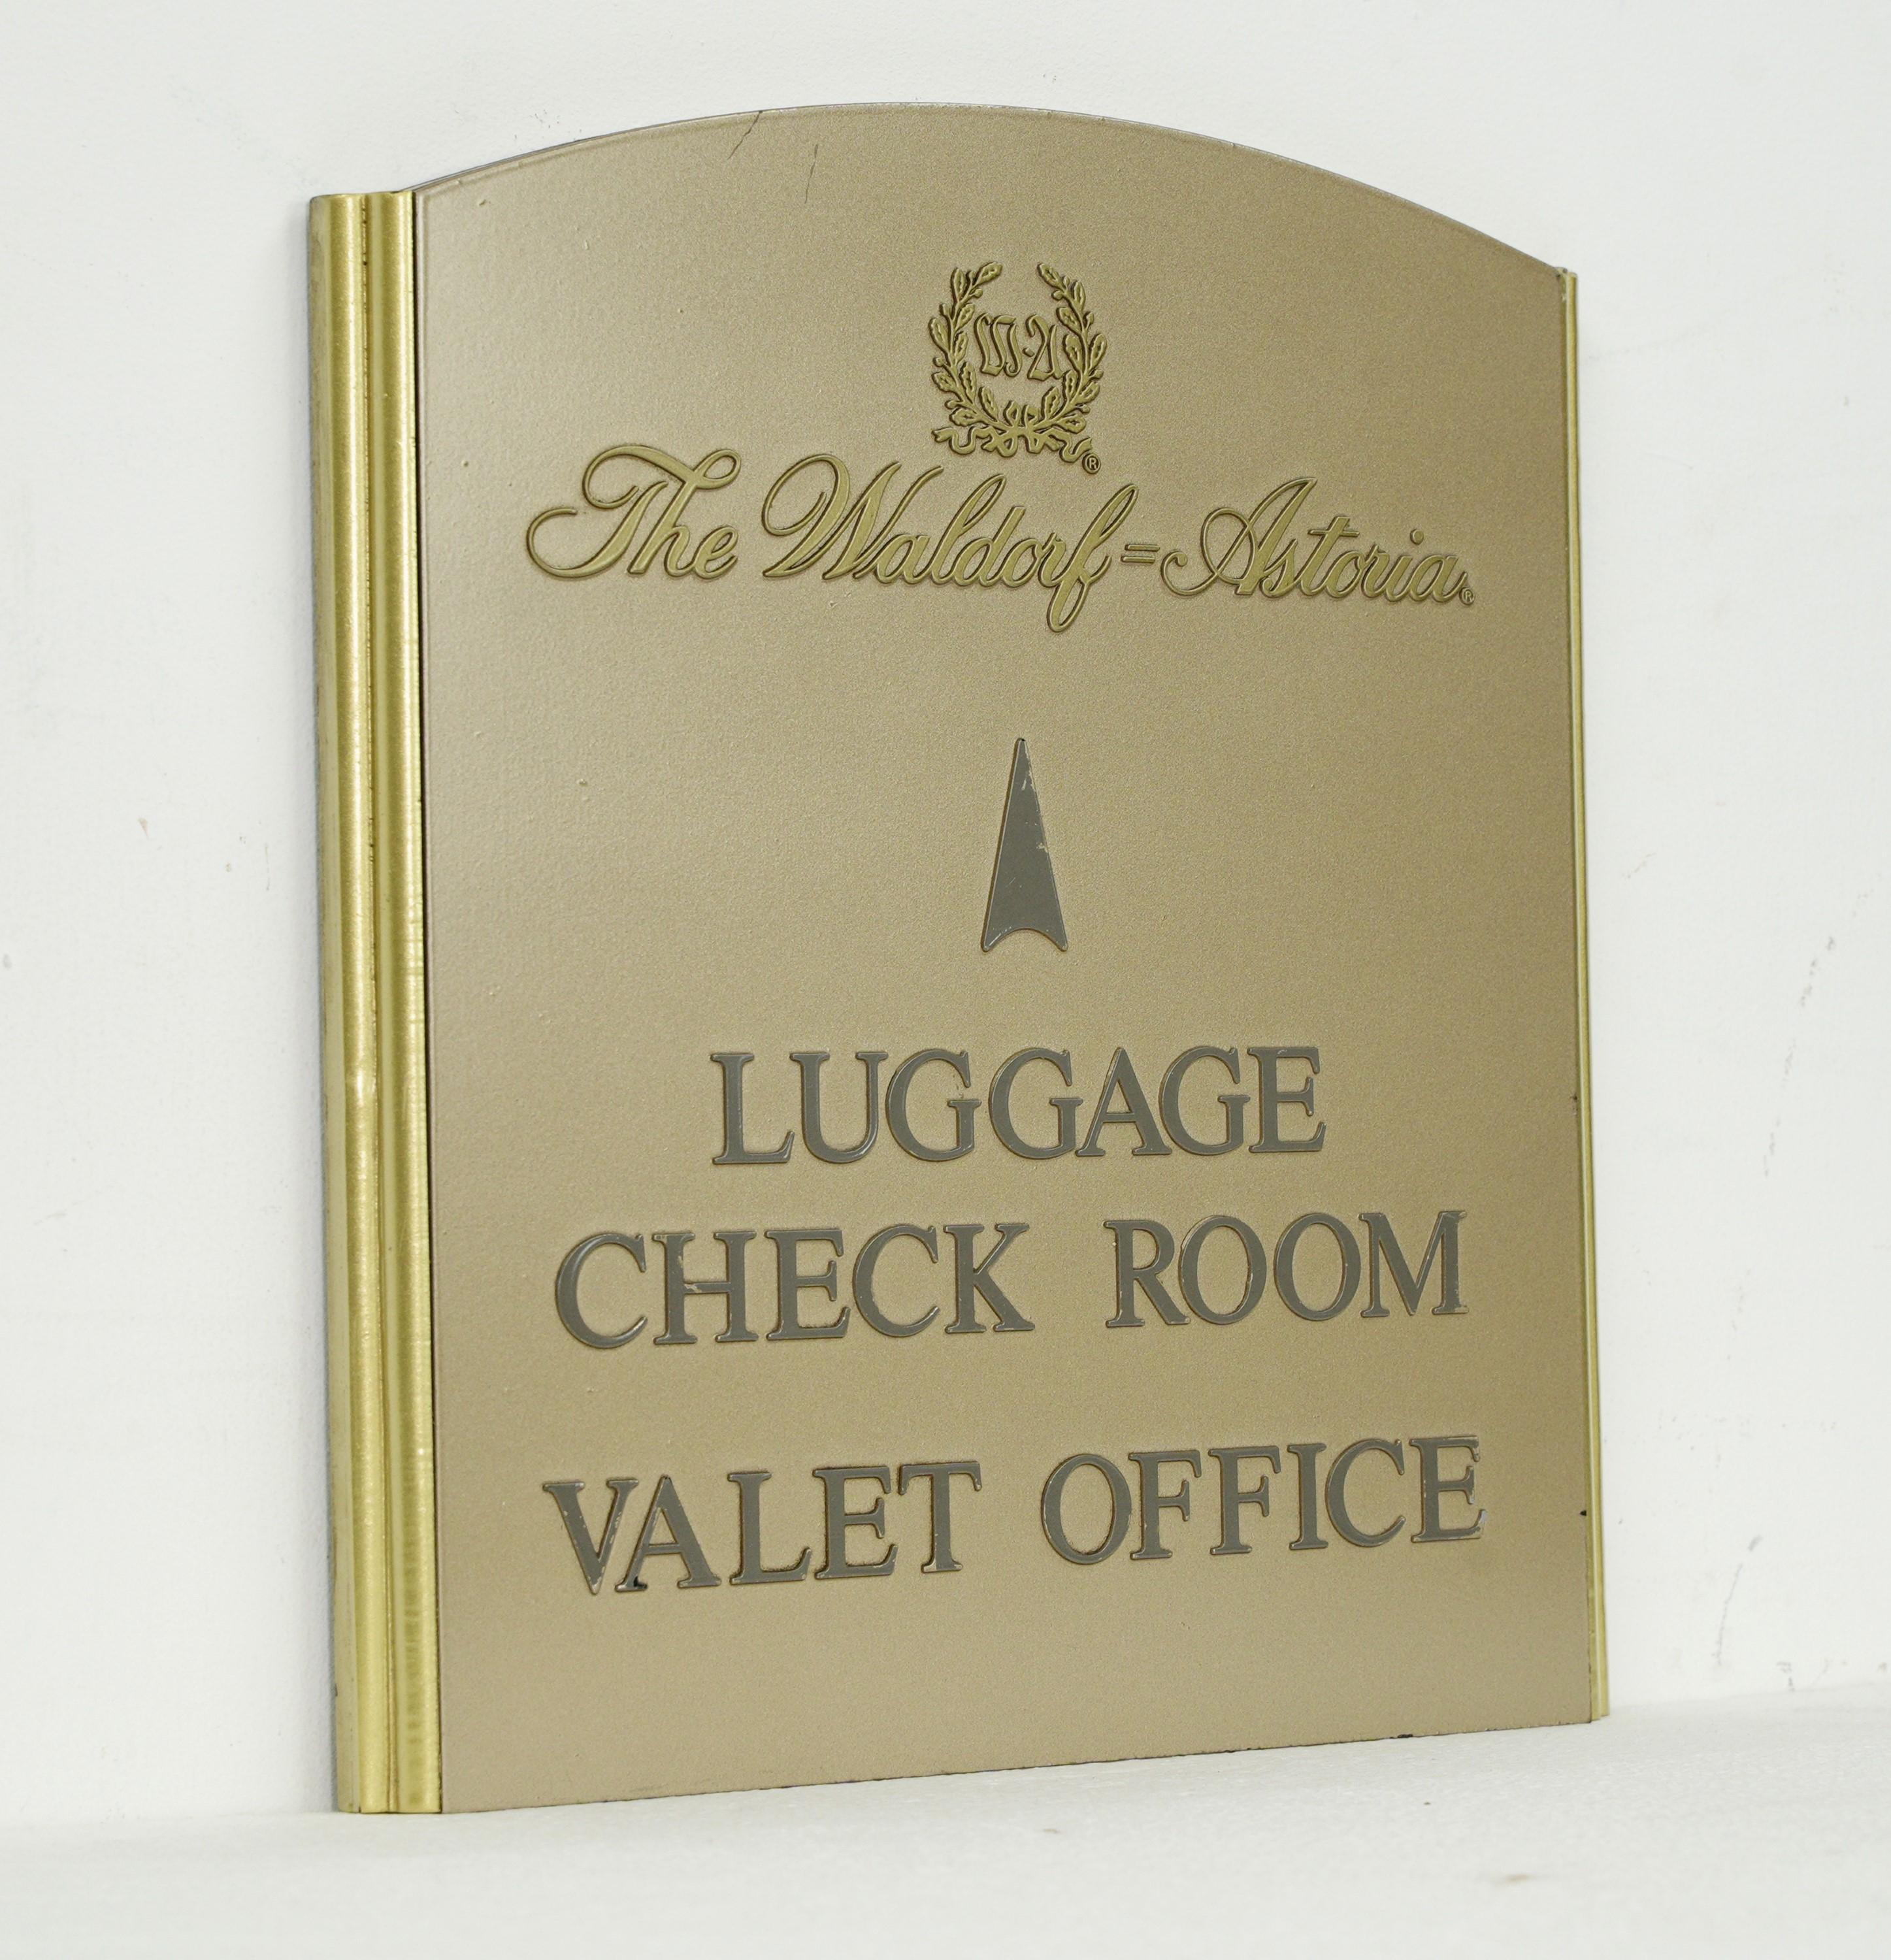 Waldorf Astoria Hotel Check Room Valet Office Sign In Good Condition For Sale In New York, NY